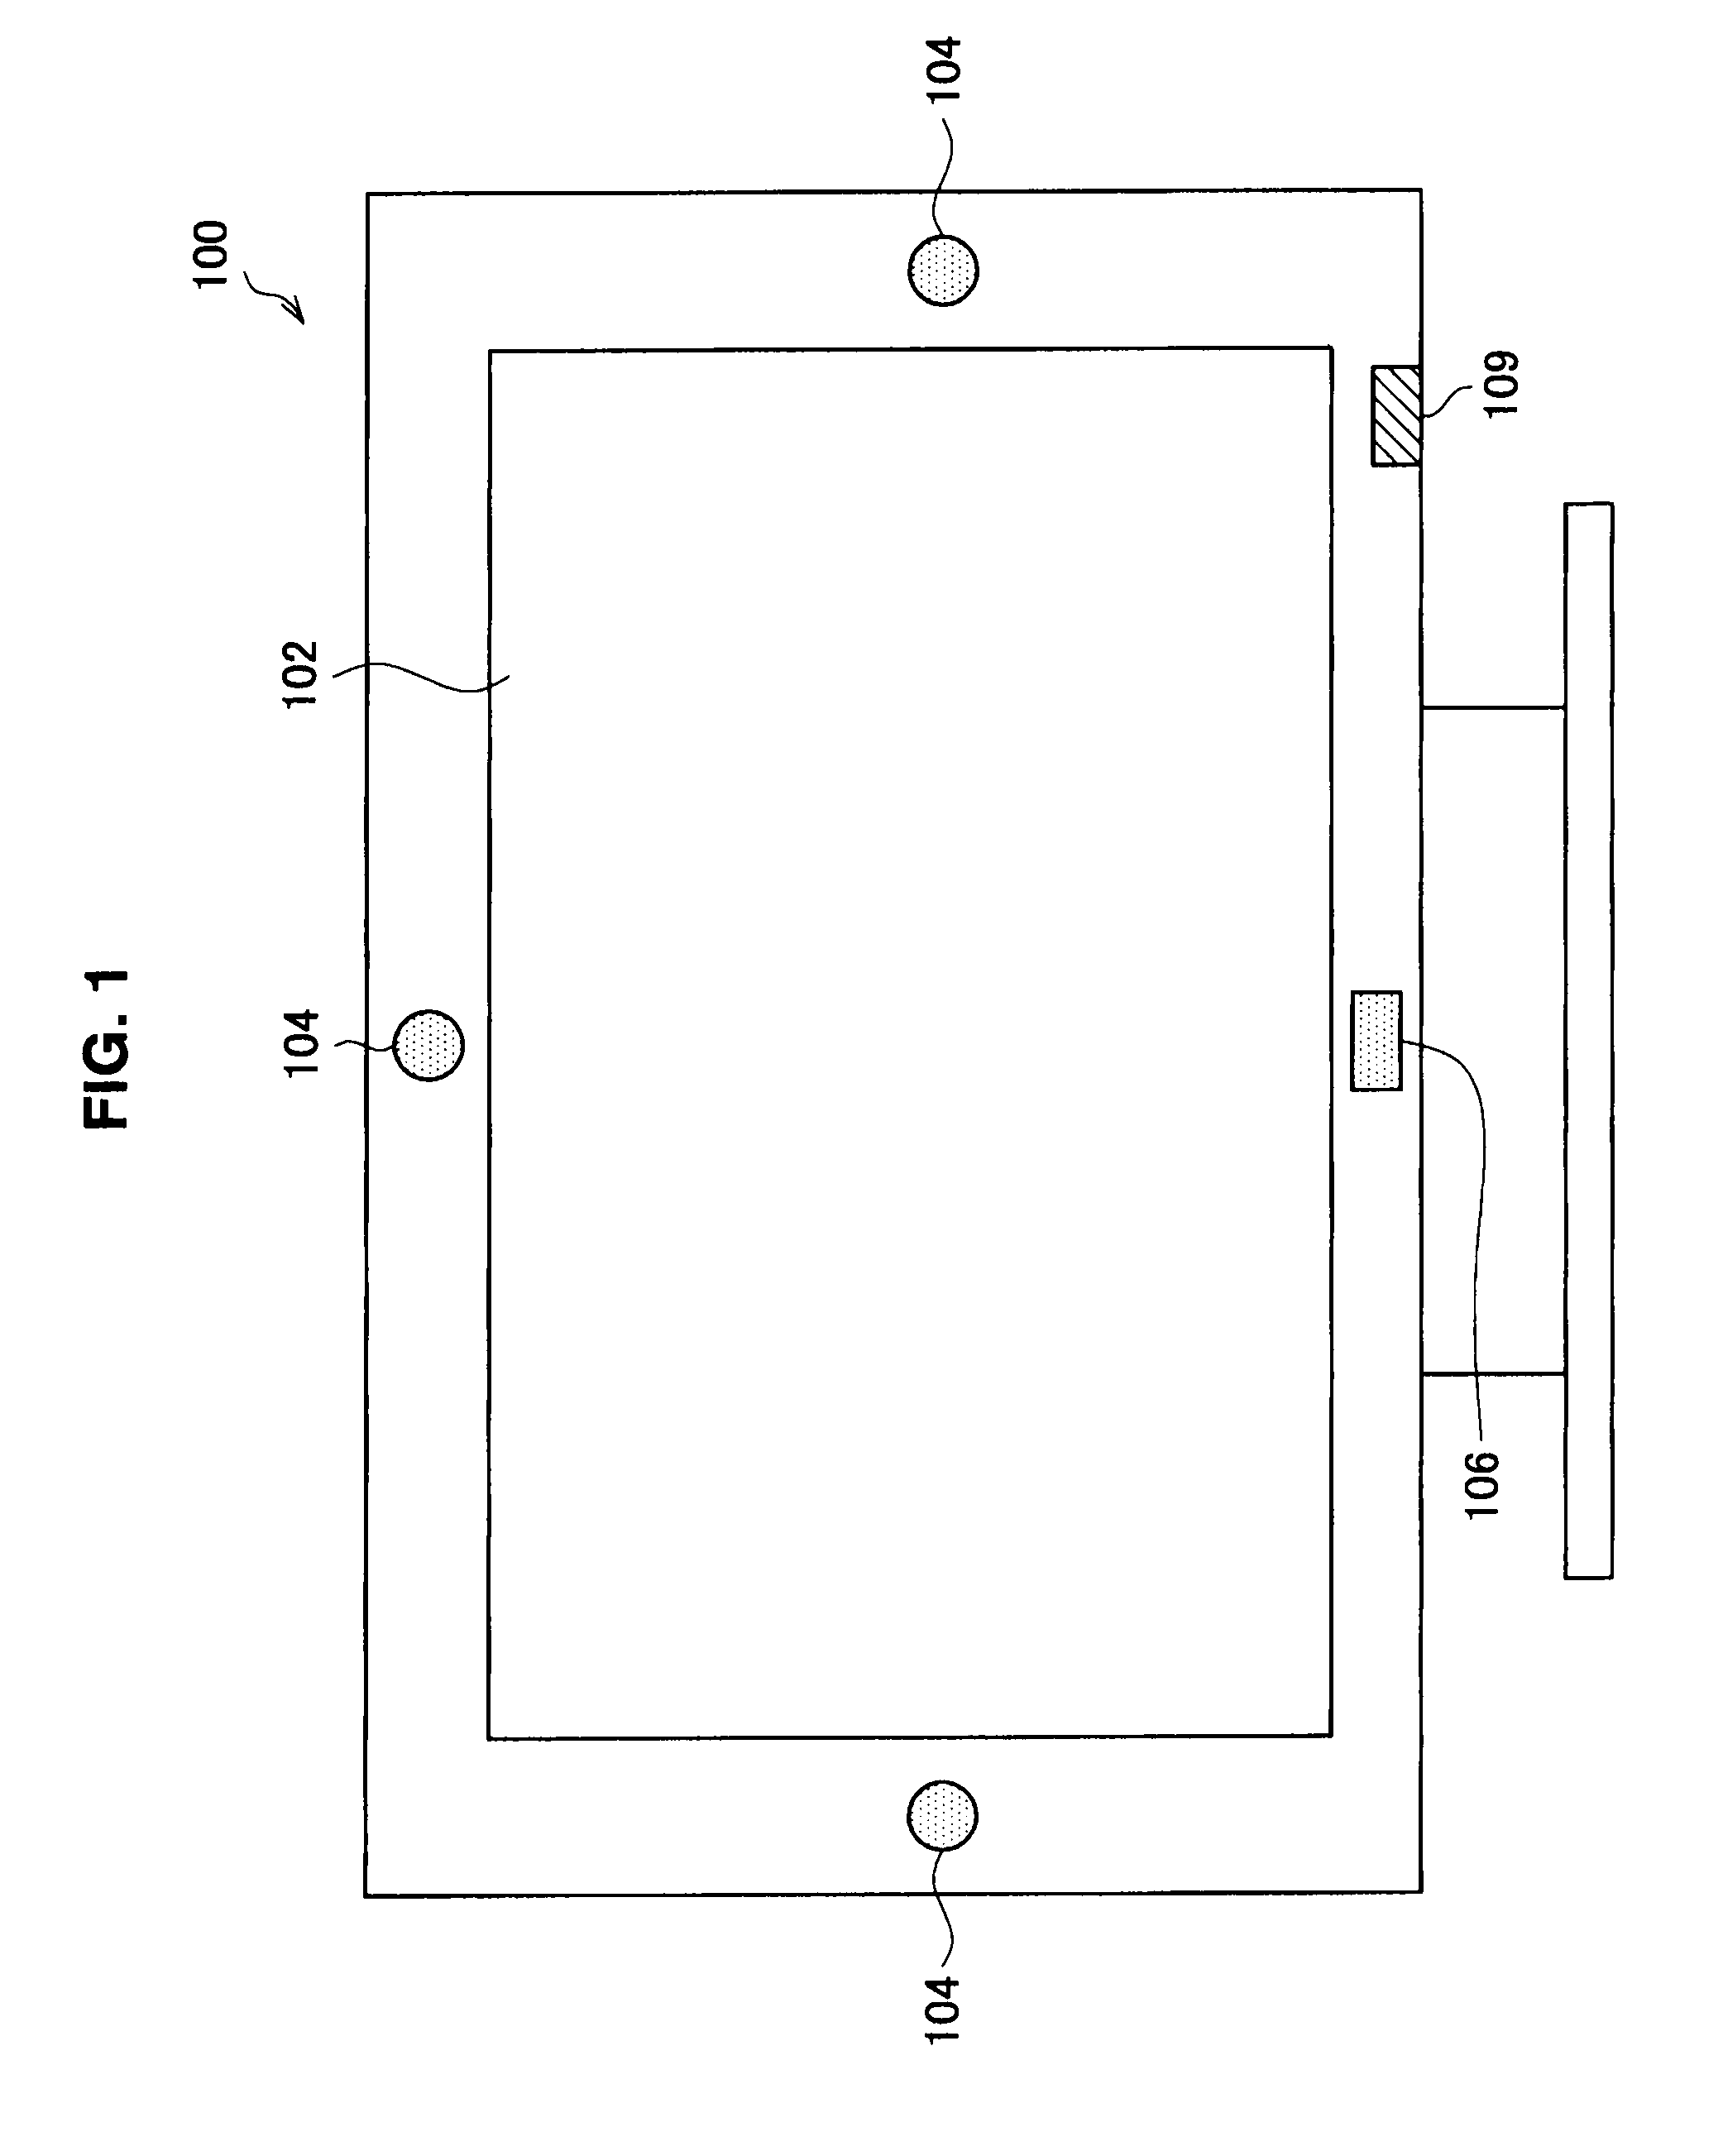 Display device and control method